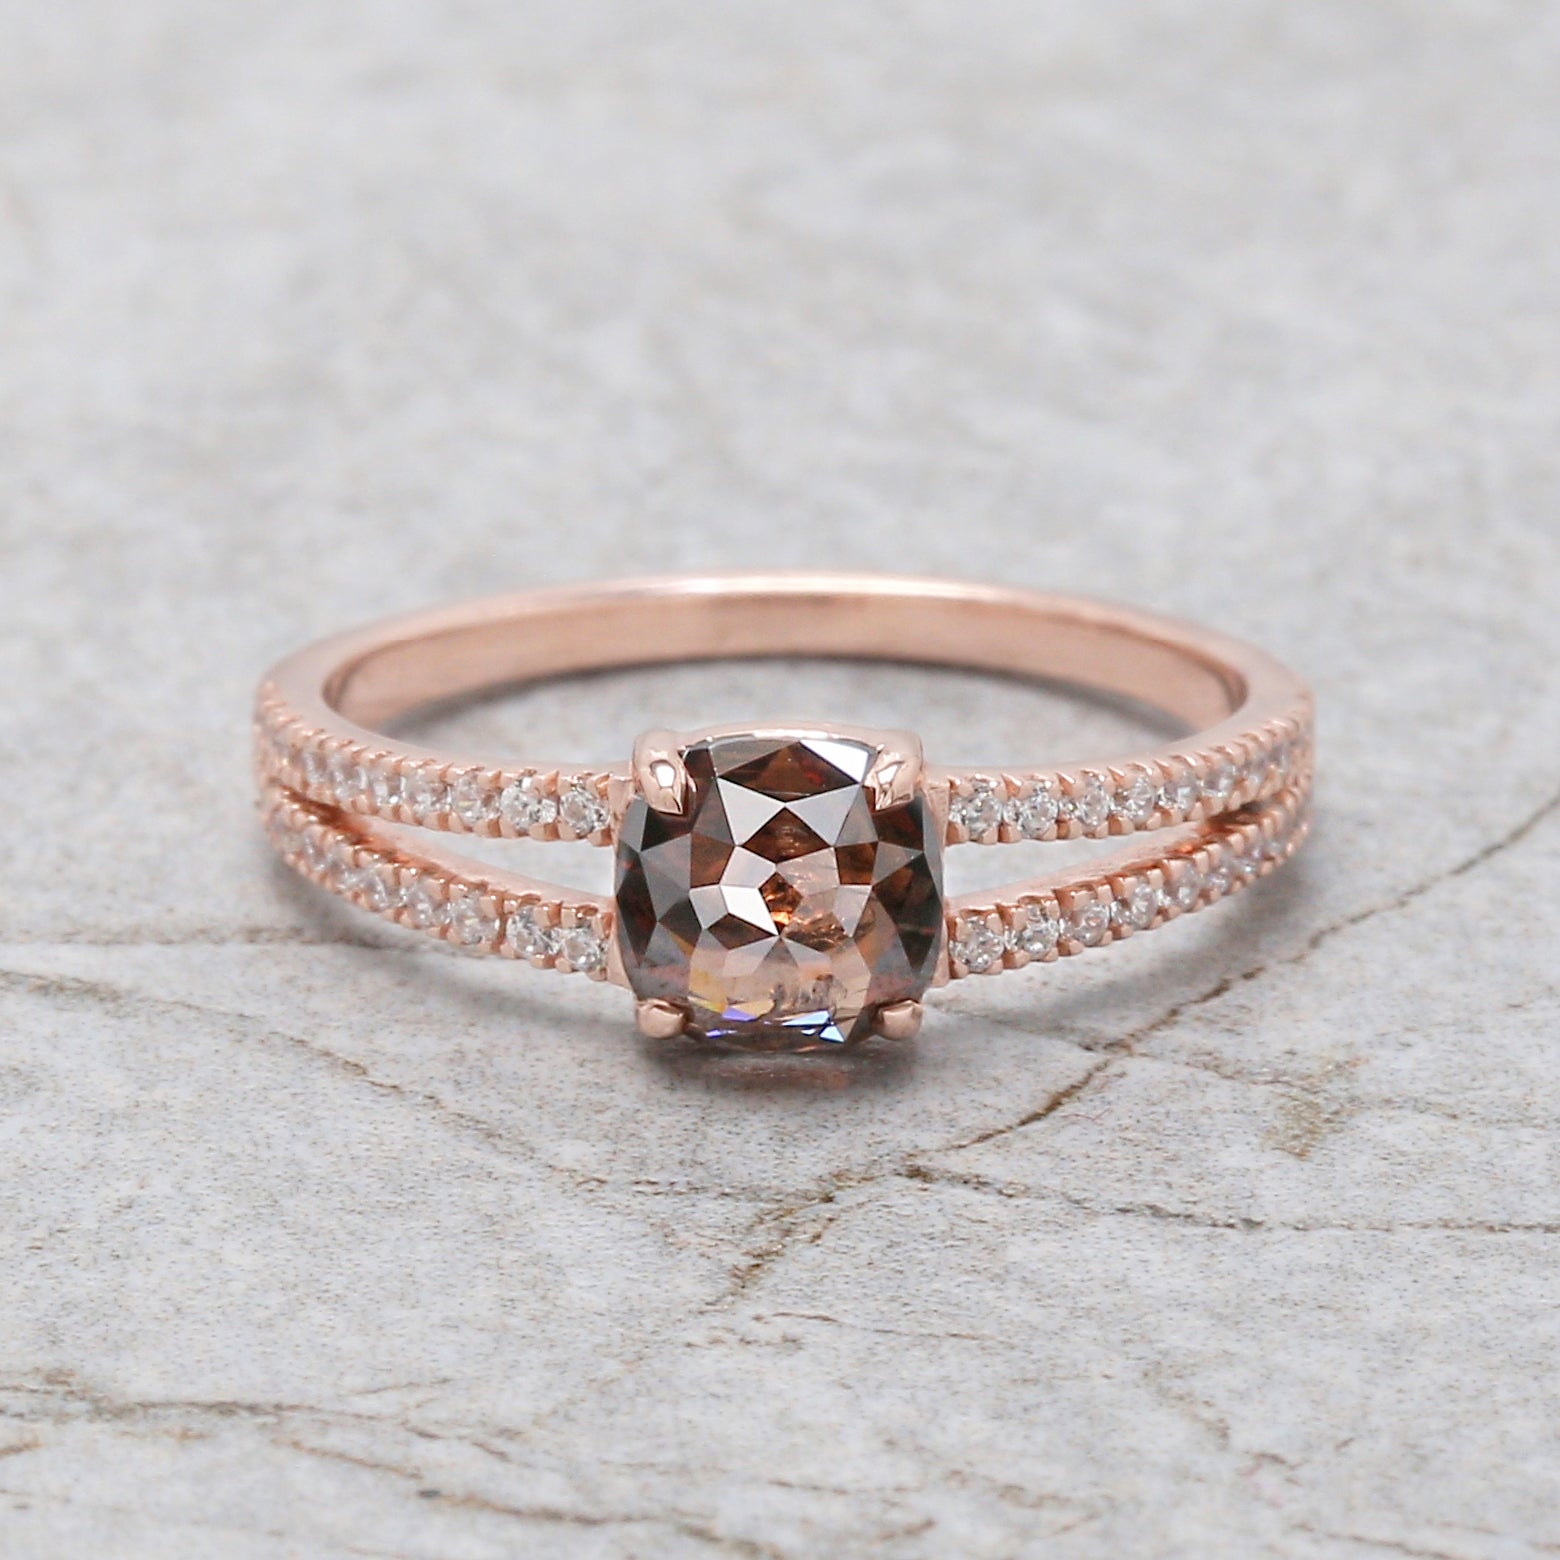 Cushion Shape Brown Color Diamond Ring 0.91 Ct 5.75 MM Cushion Diamond Ring 14K Solid Rose Gold Silver Engagement Ring Gift For Her QN2197